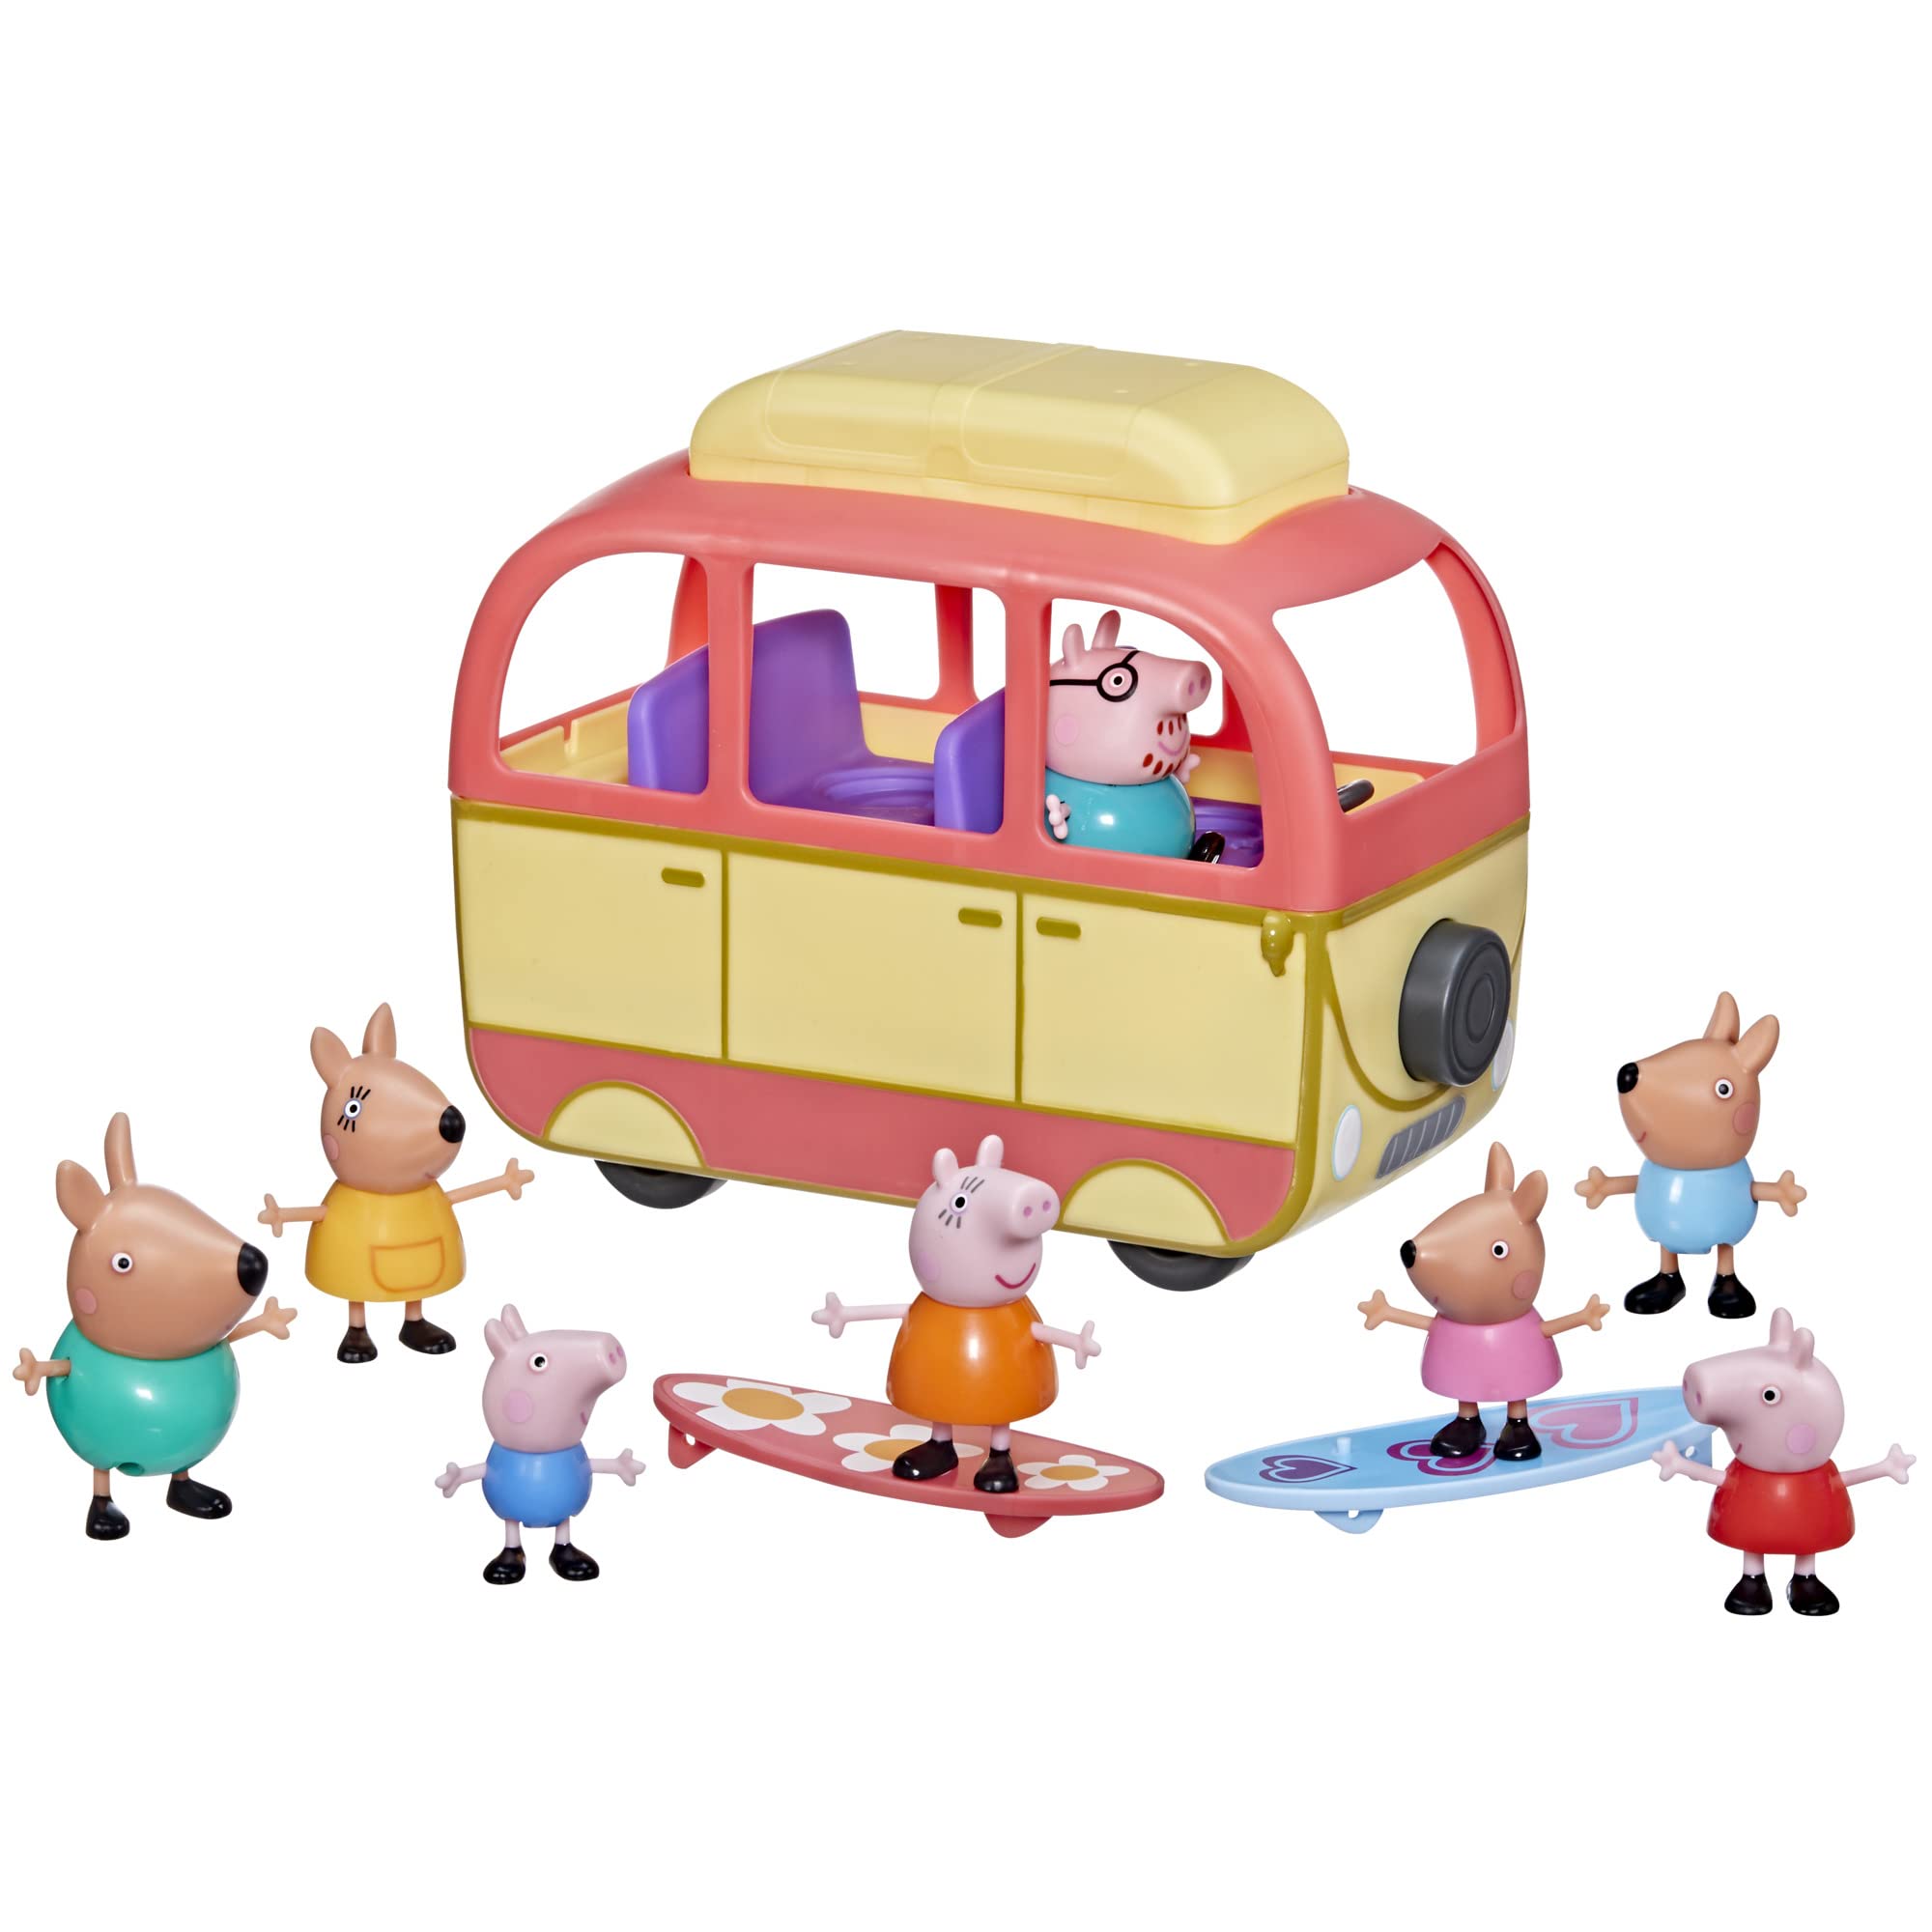 Peppa Pig Peppa Visits Australia Campervan Vehicle Preschool Toy; Includes 8 Figures, 4 Accessories, for Ages 3 and Up